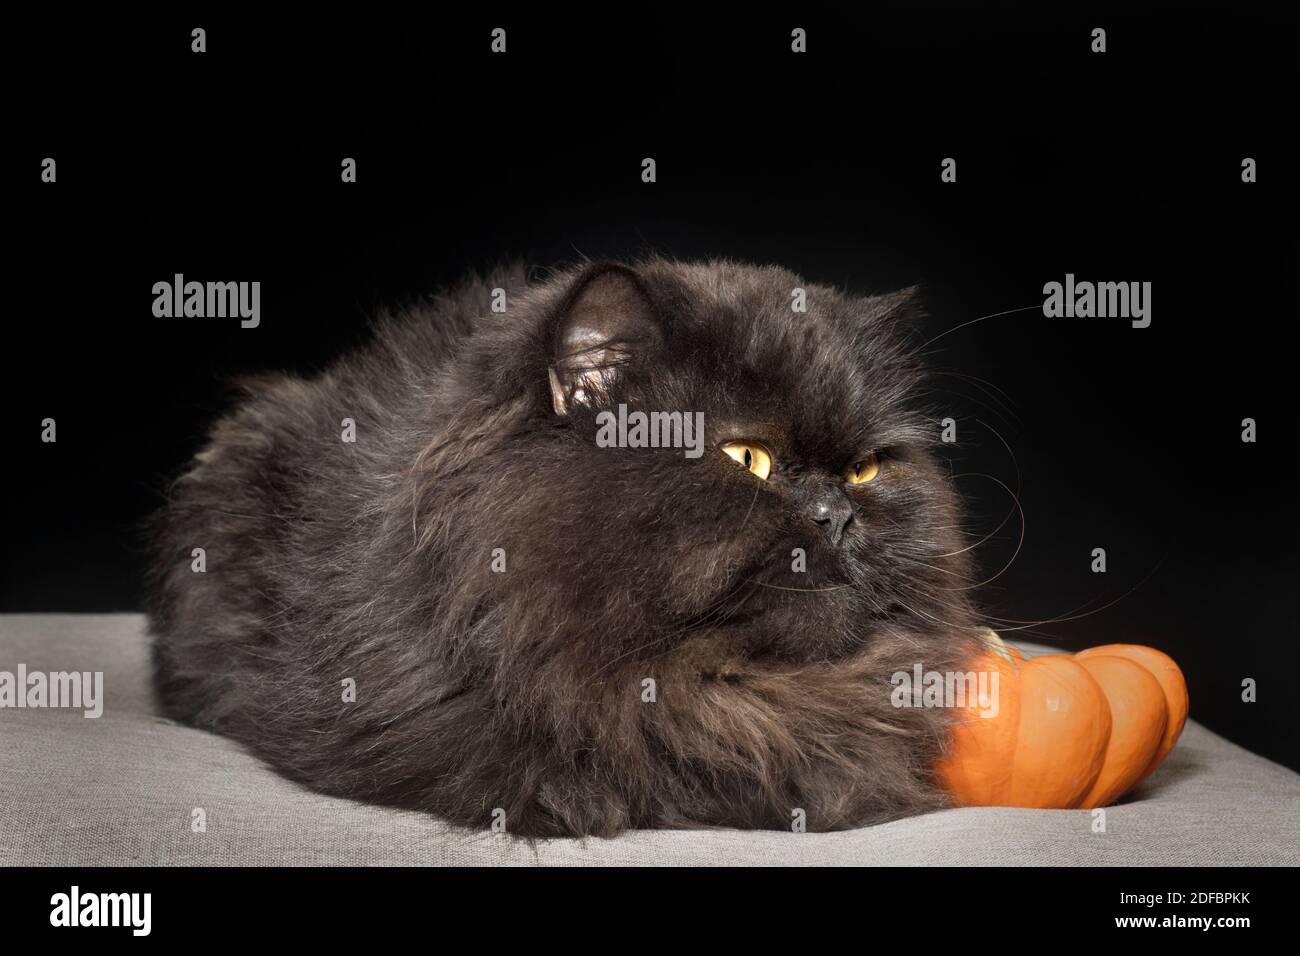 Black persian cat sitting with his feet tucked in, posing with a small orange pumpkin. Stock Photo